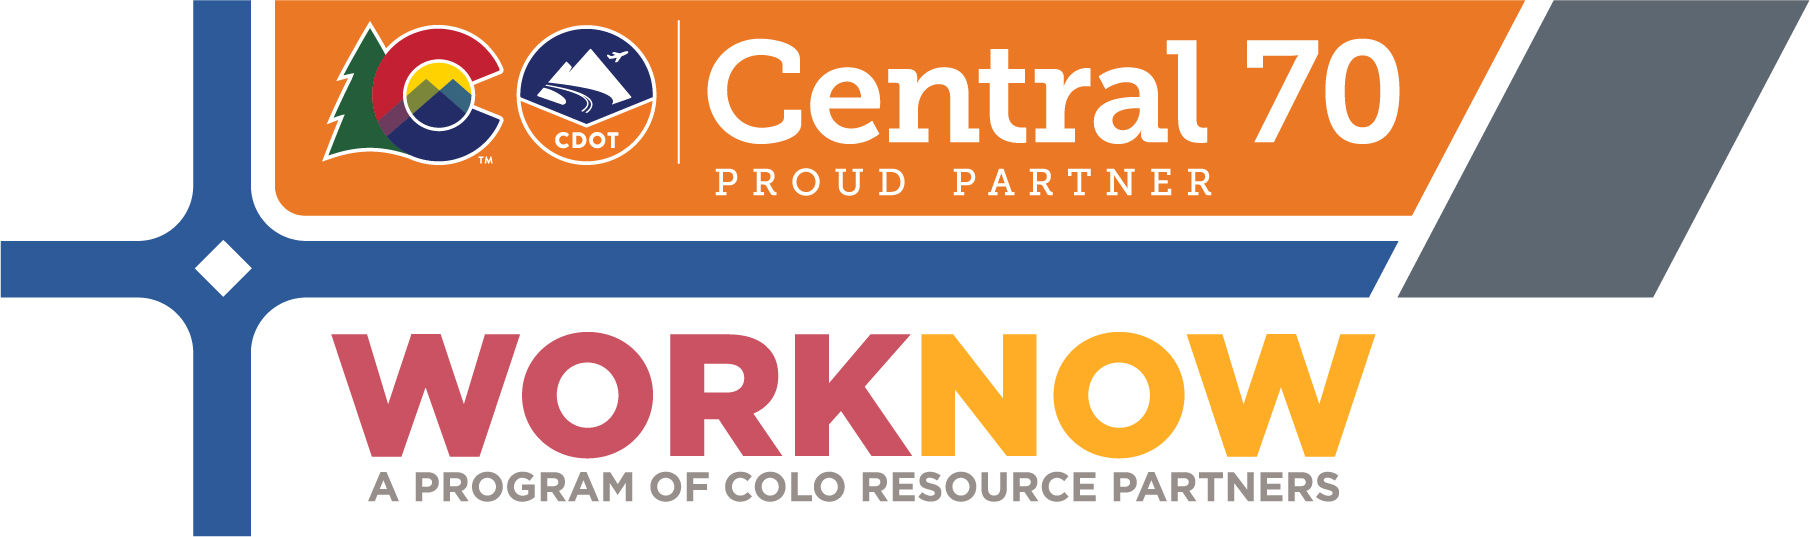 NEW Central70-WORKNOW-Brand [Converted]-01.jpg detail image